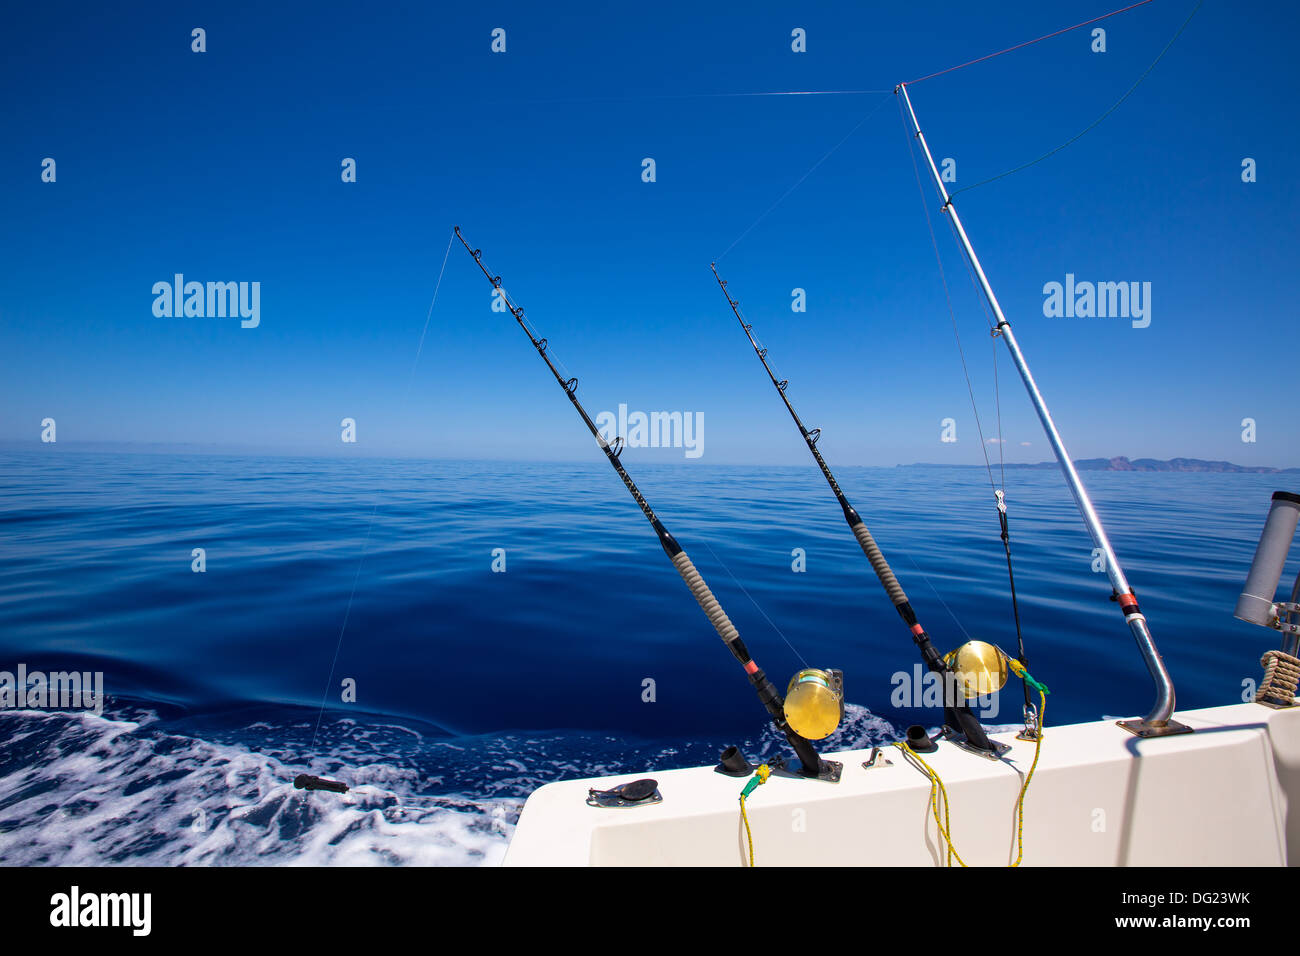 Ibiza fishing boat trolling with rods and reels in blue